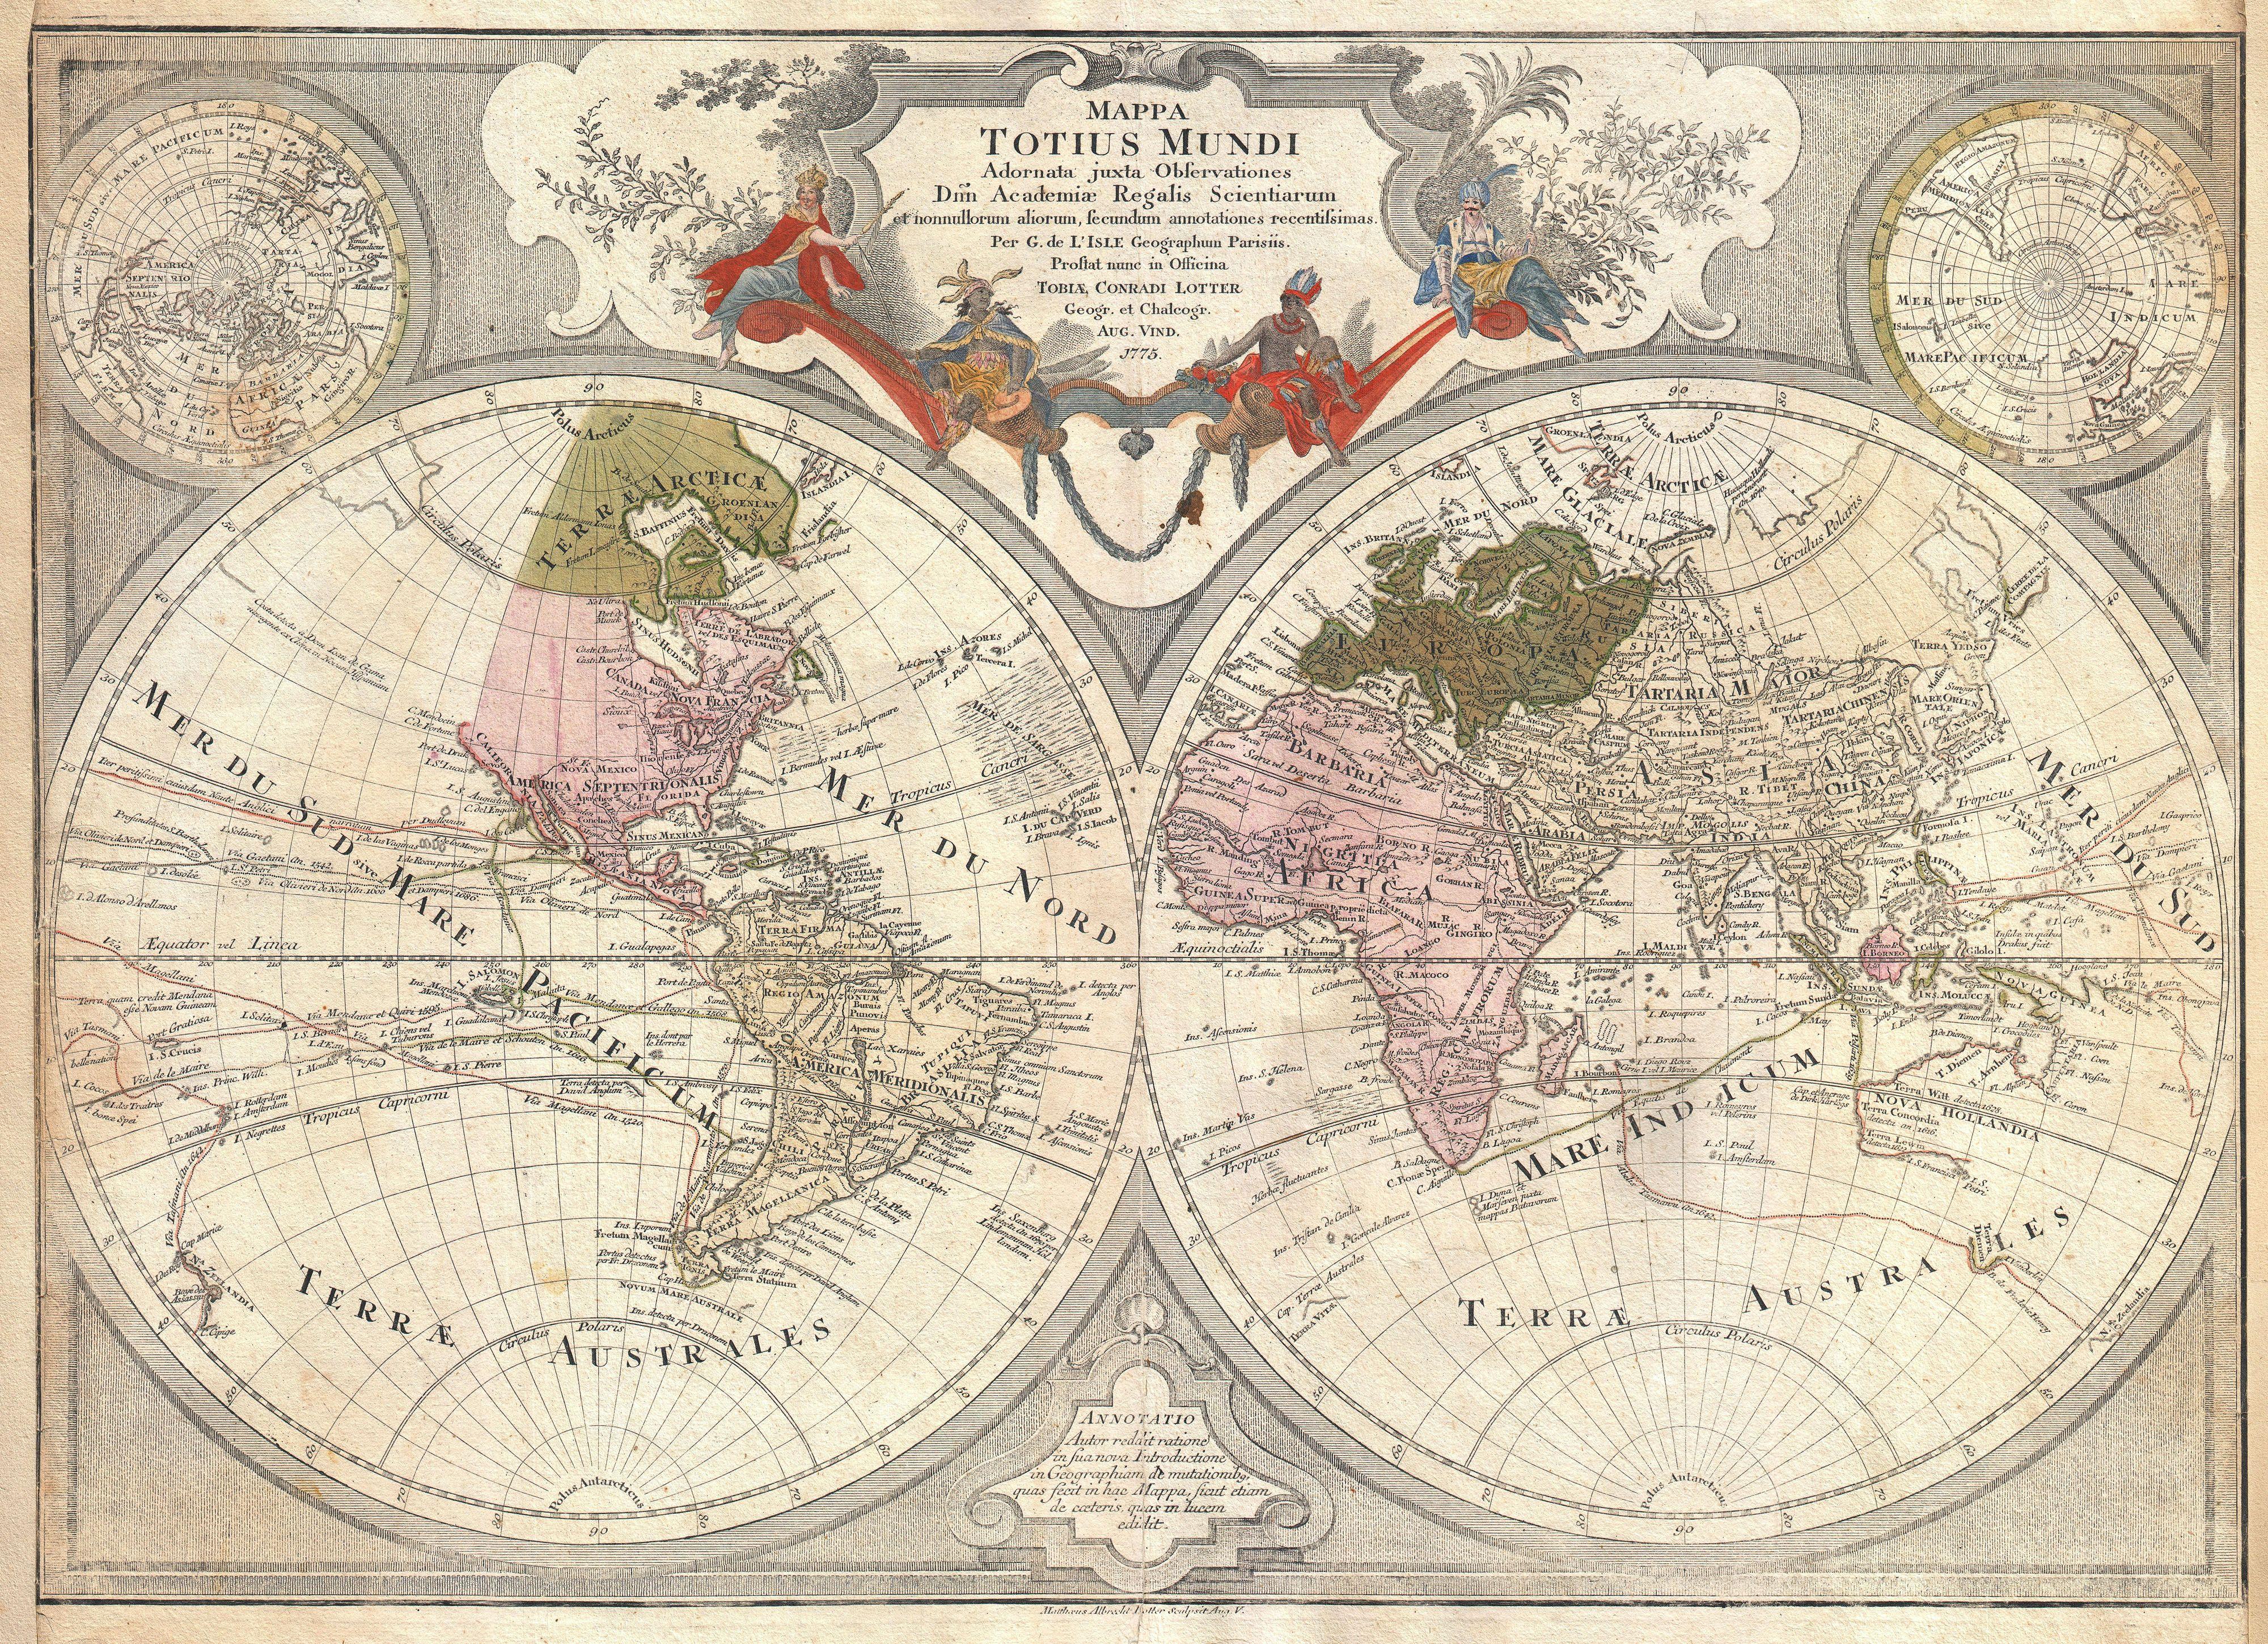 Lotter Map of the World on a Hemisphere Projection, 1775 / Public domain image from Wikimedia Commons